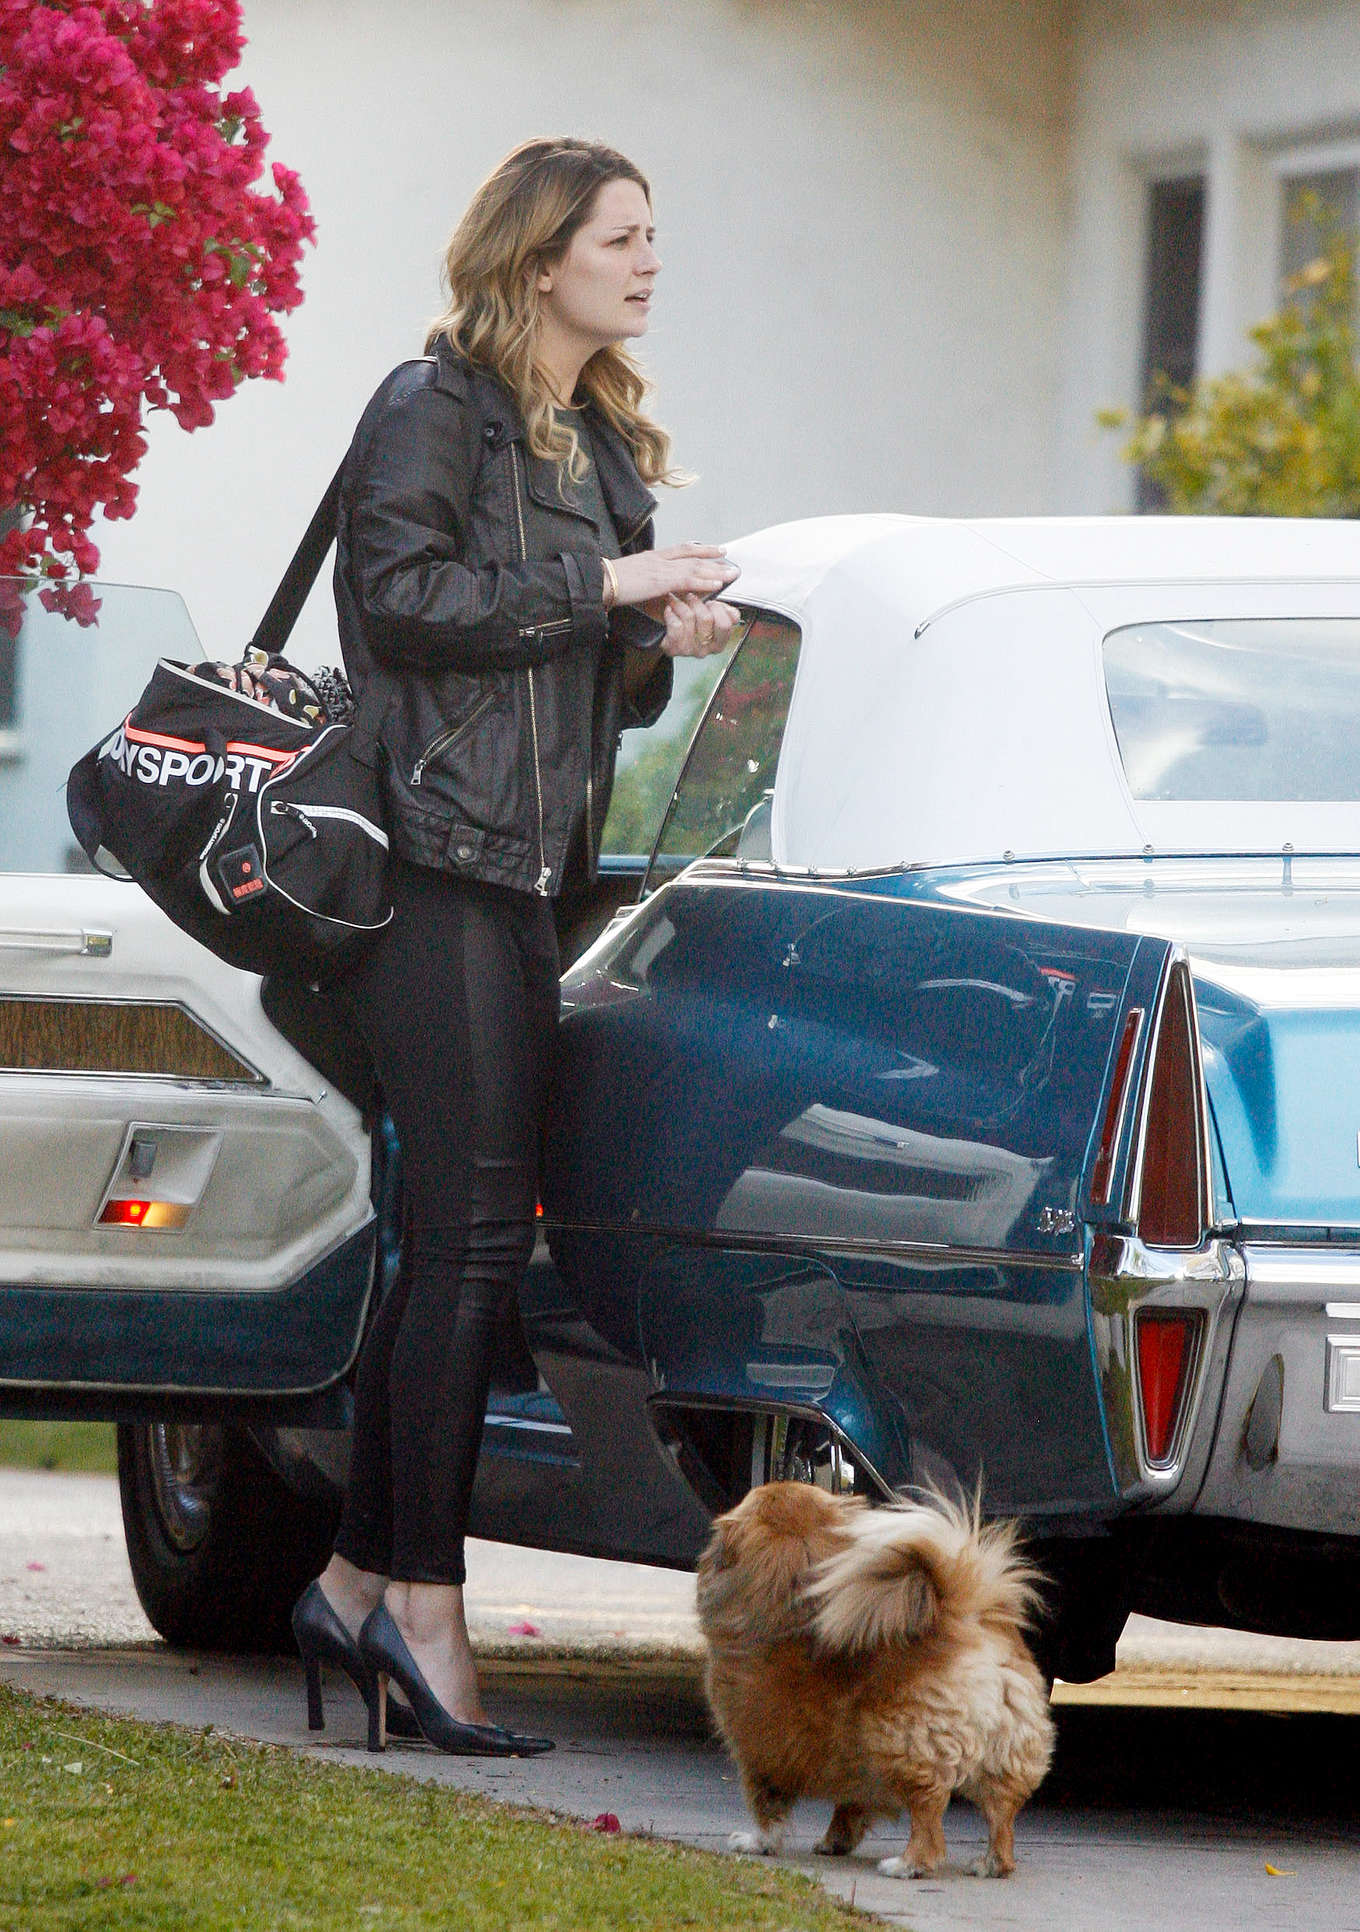 Mischa Barton at a gas station in LA